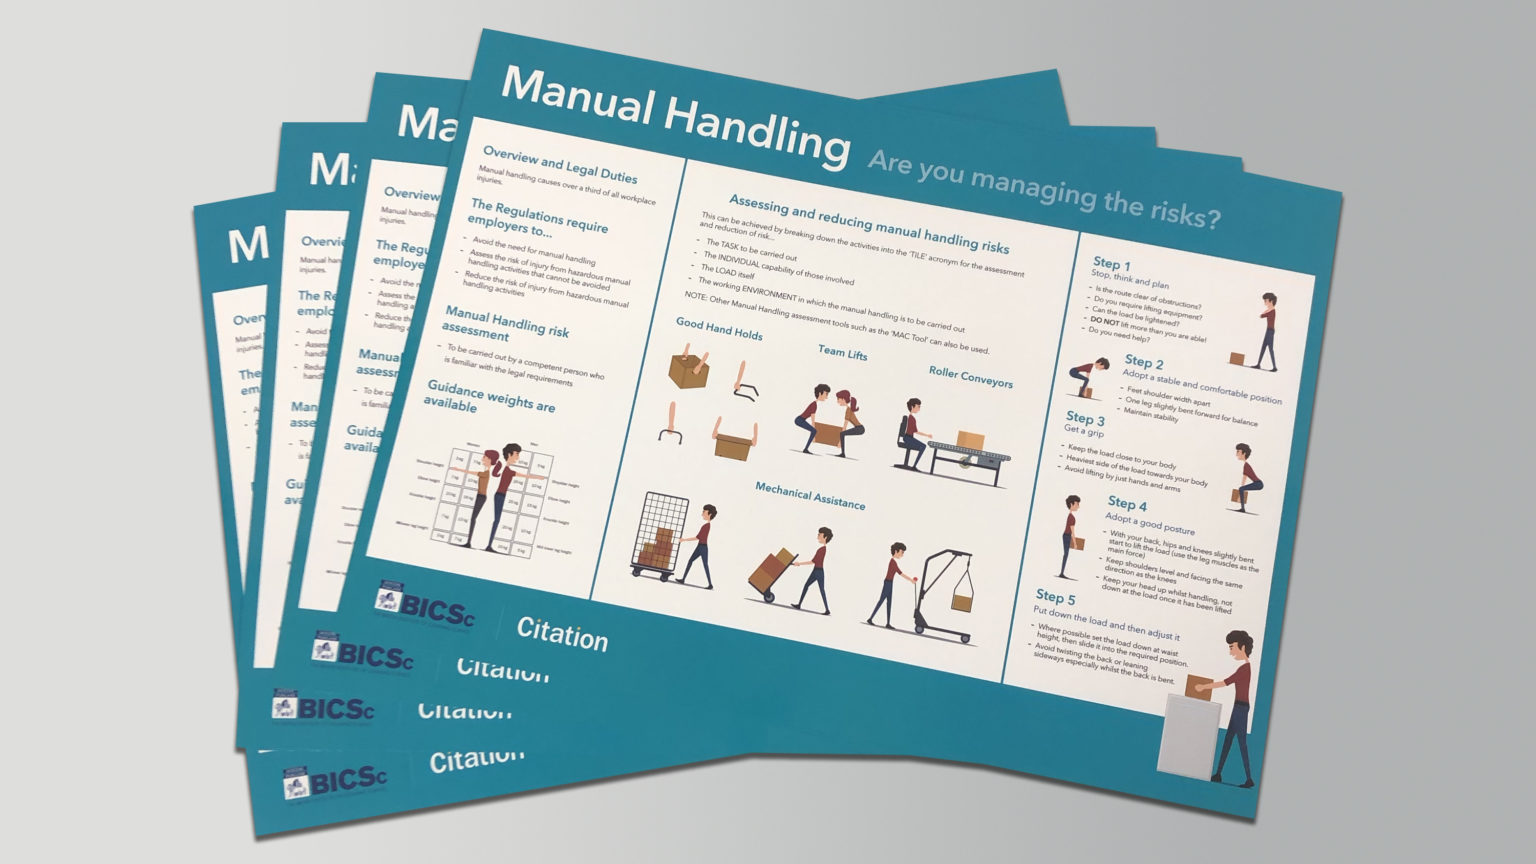 Handling на русский. Manual handling. "Manual handling of loads"+"Spine". Manual handling poster. Health and Safety Law poster.